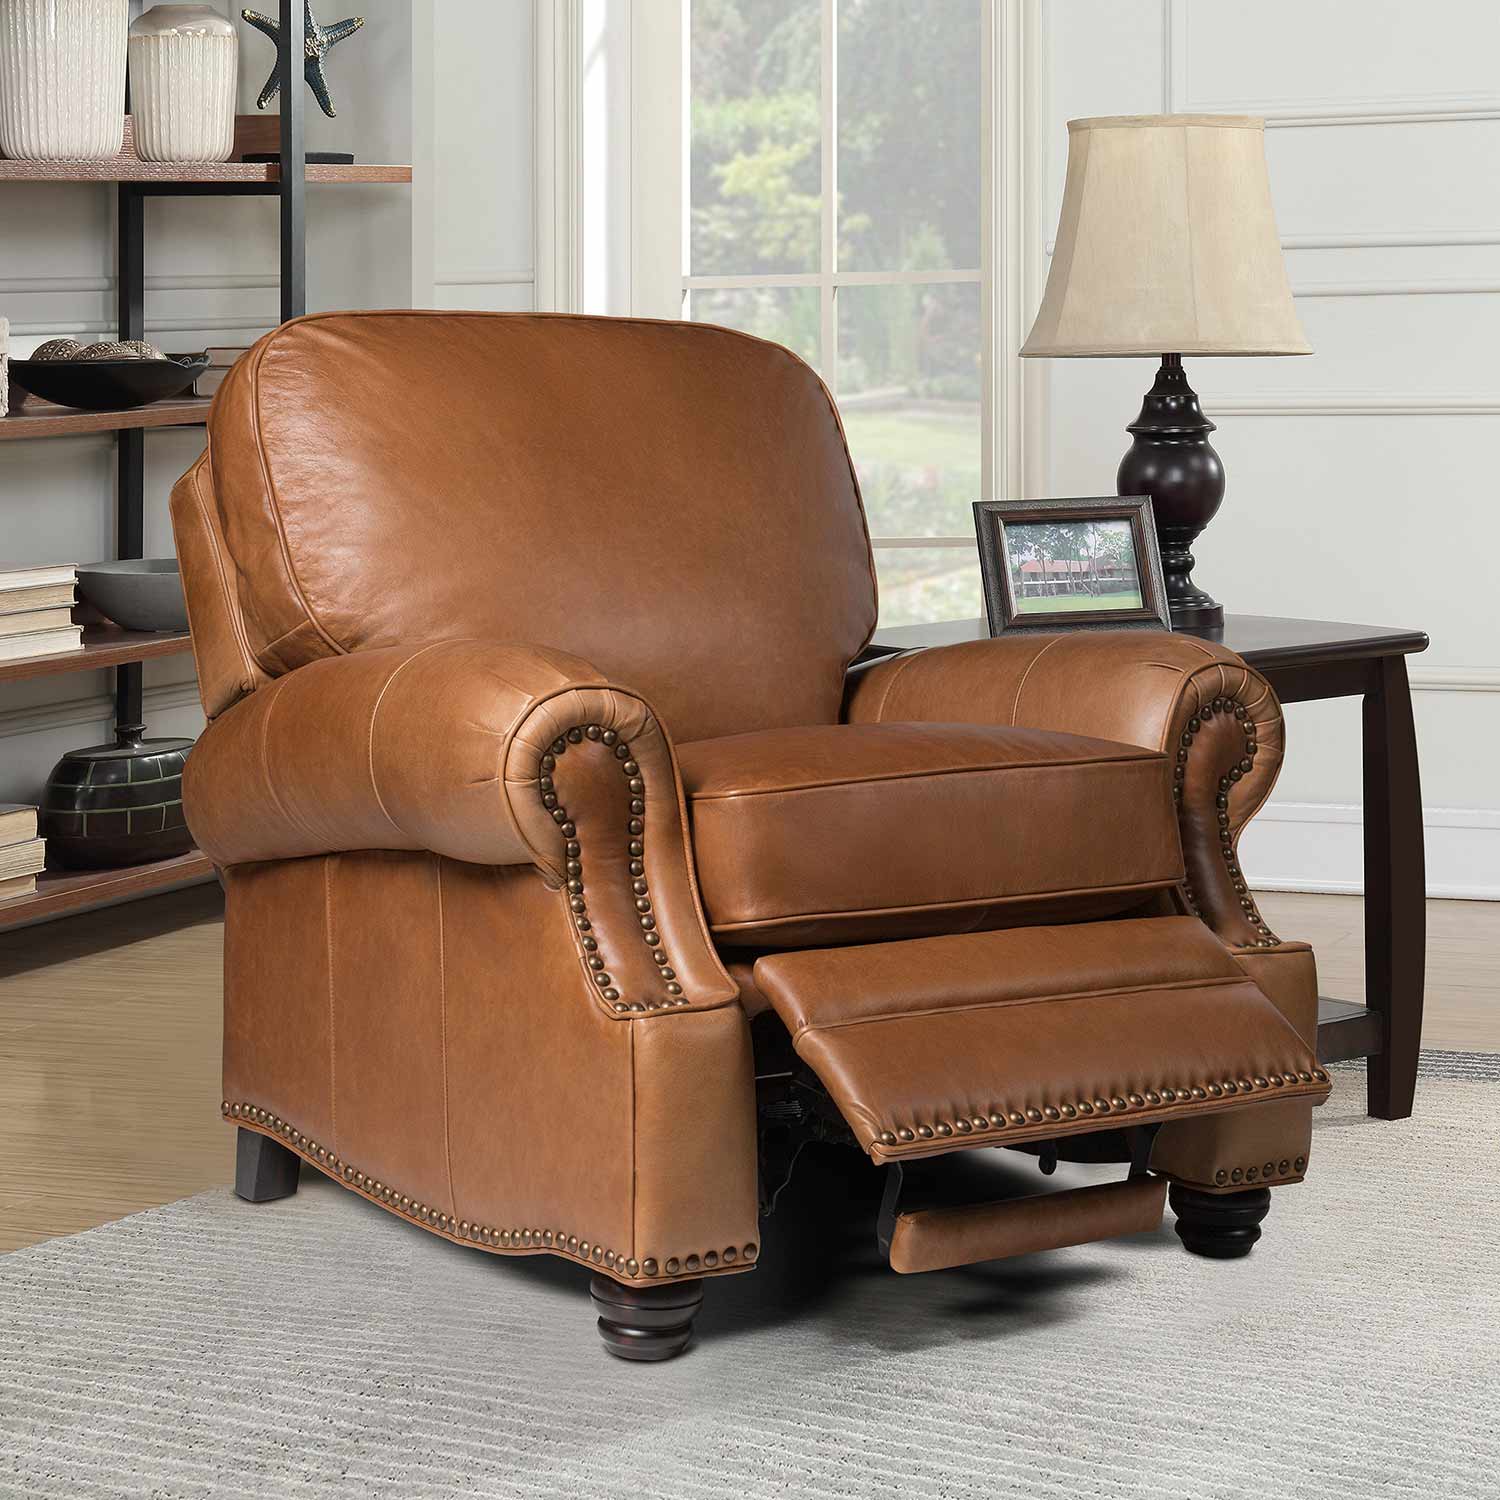 Barcalounger Longhorn Recliner Chair - Chaps Saddle/All top grain Leather